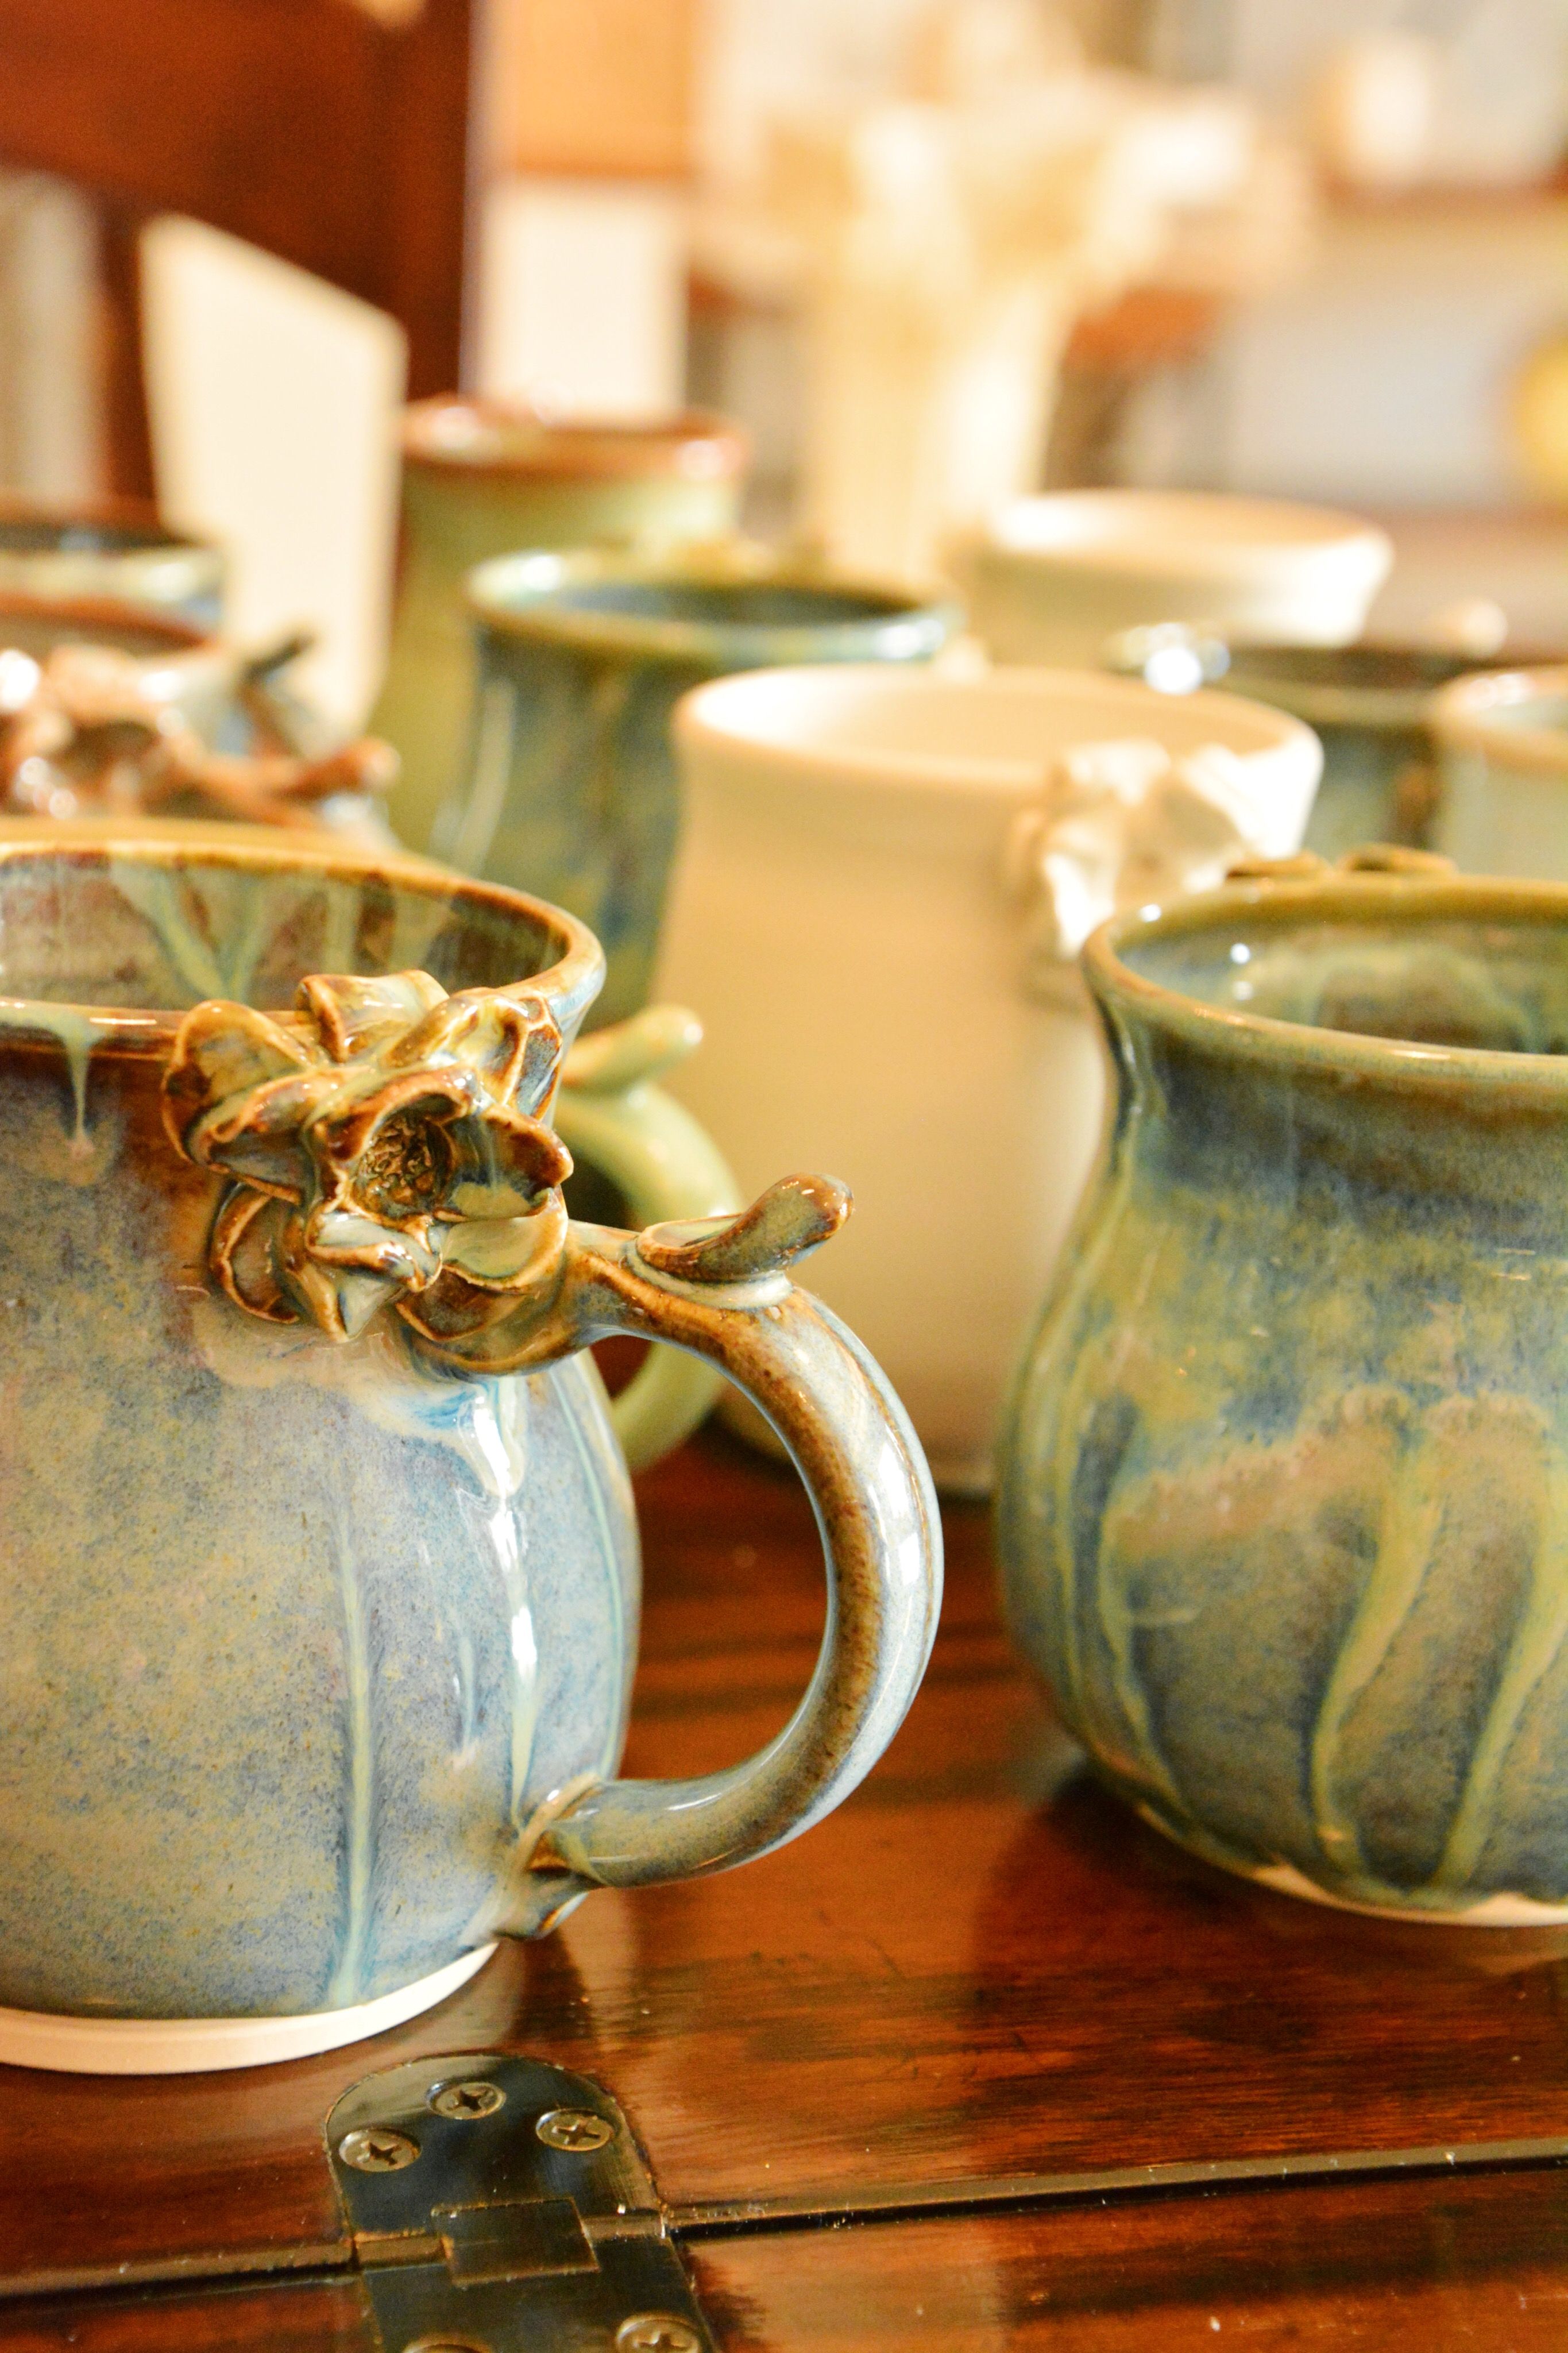 Where To Find The Best Home Made Pottery For Your Home: A Guide